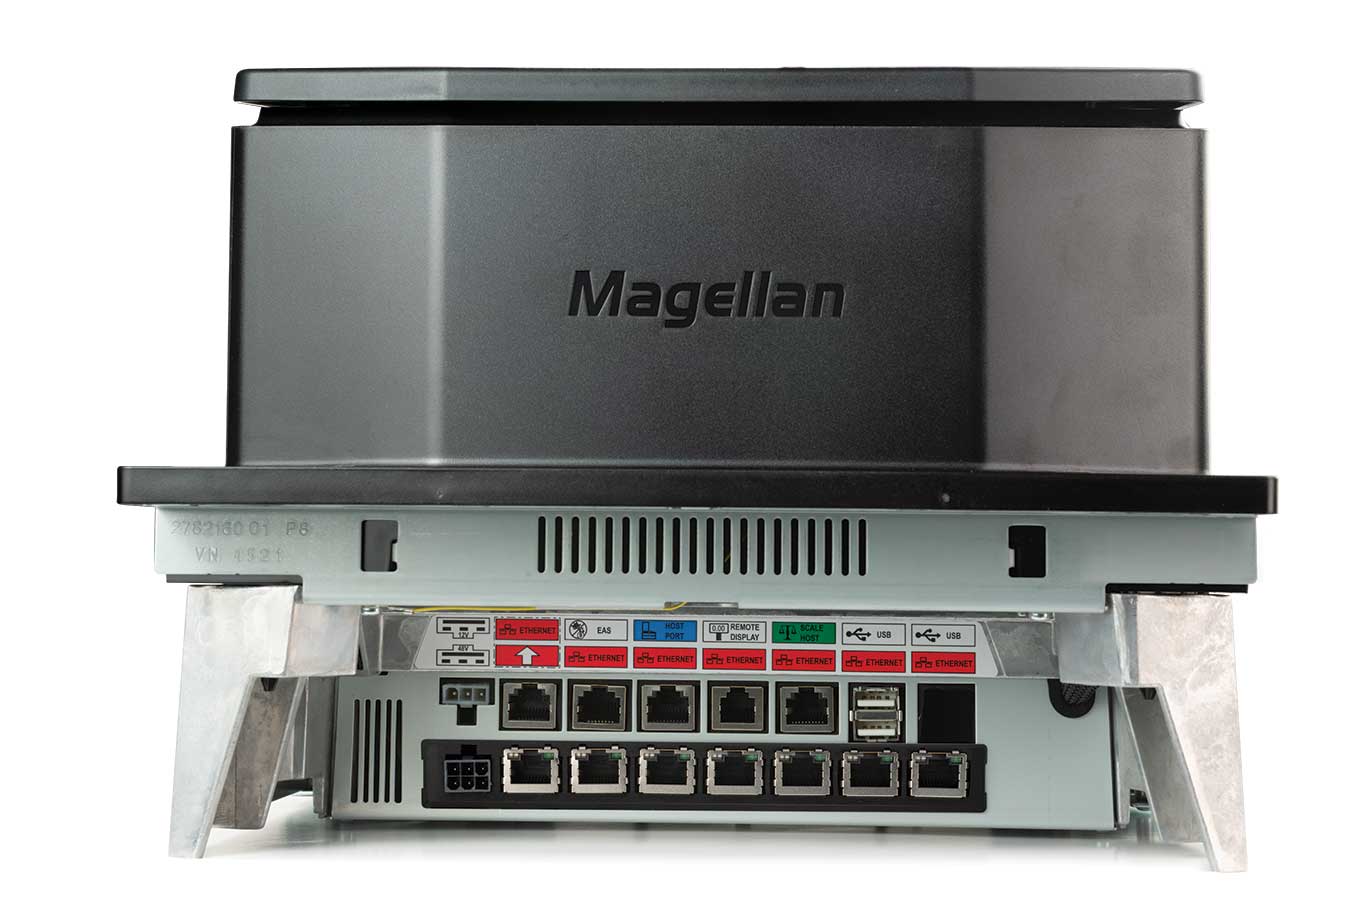 Magellan 9600i, Backside with Ports